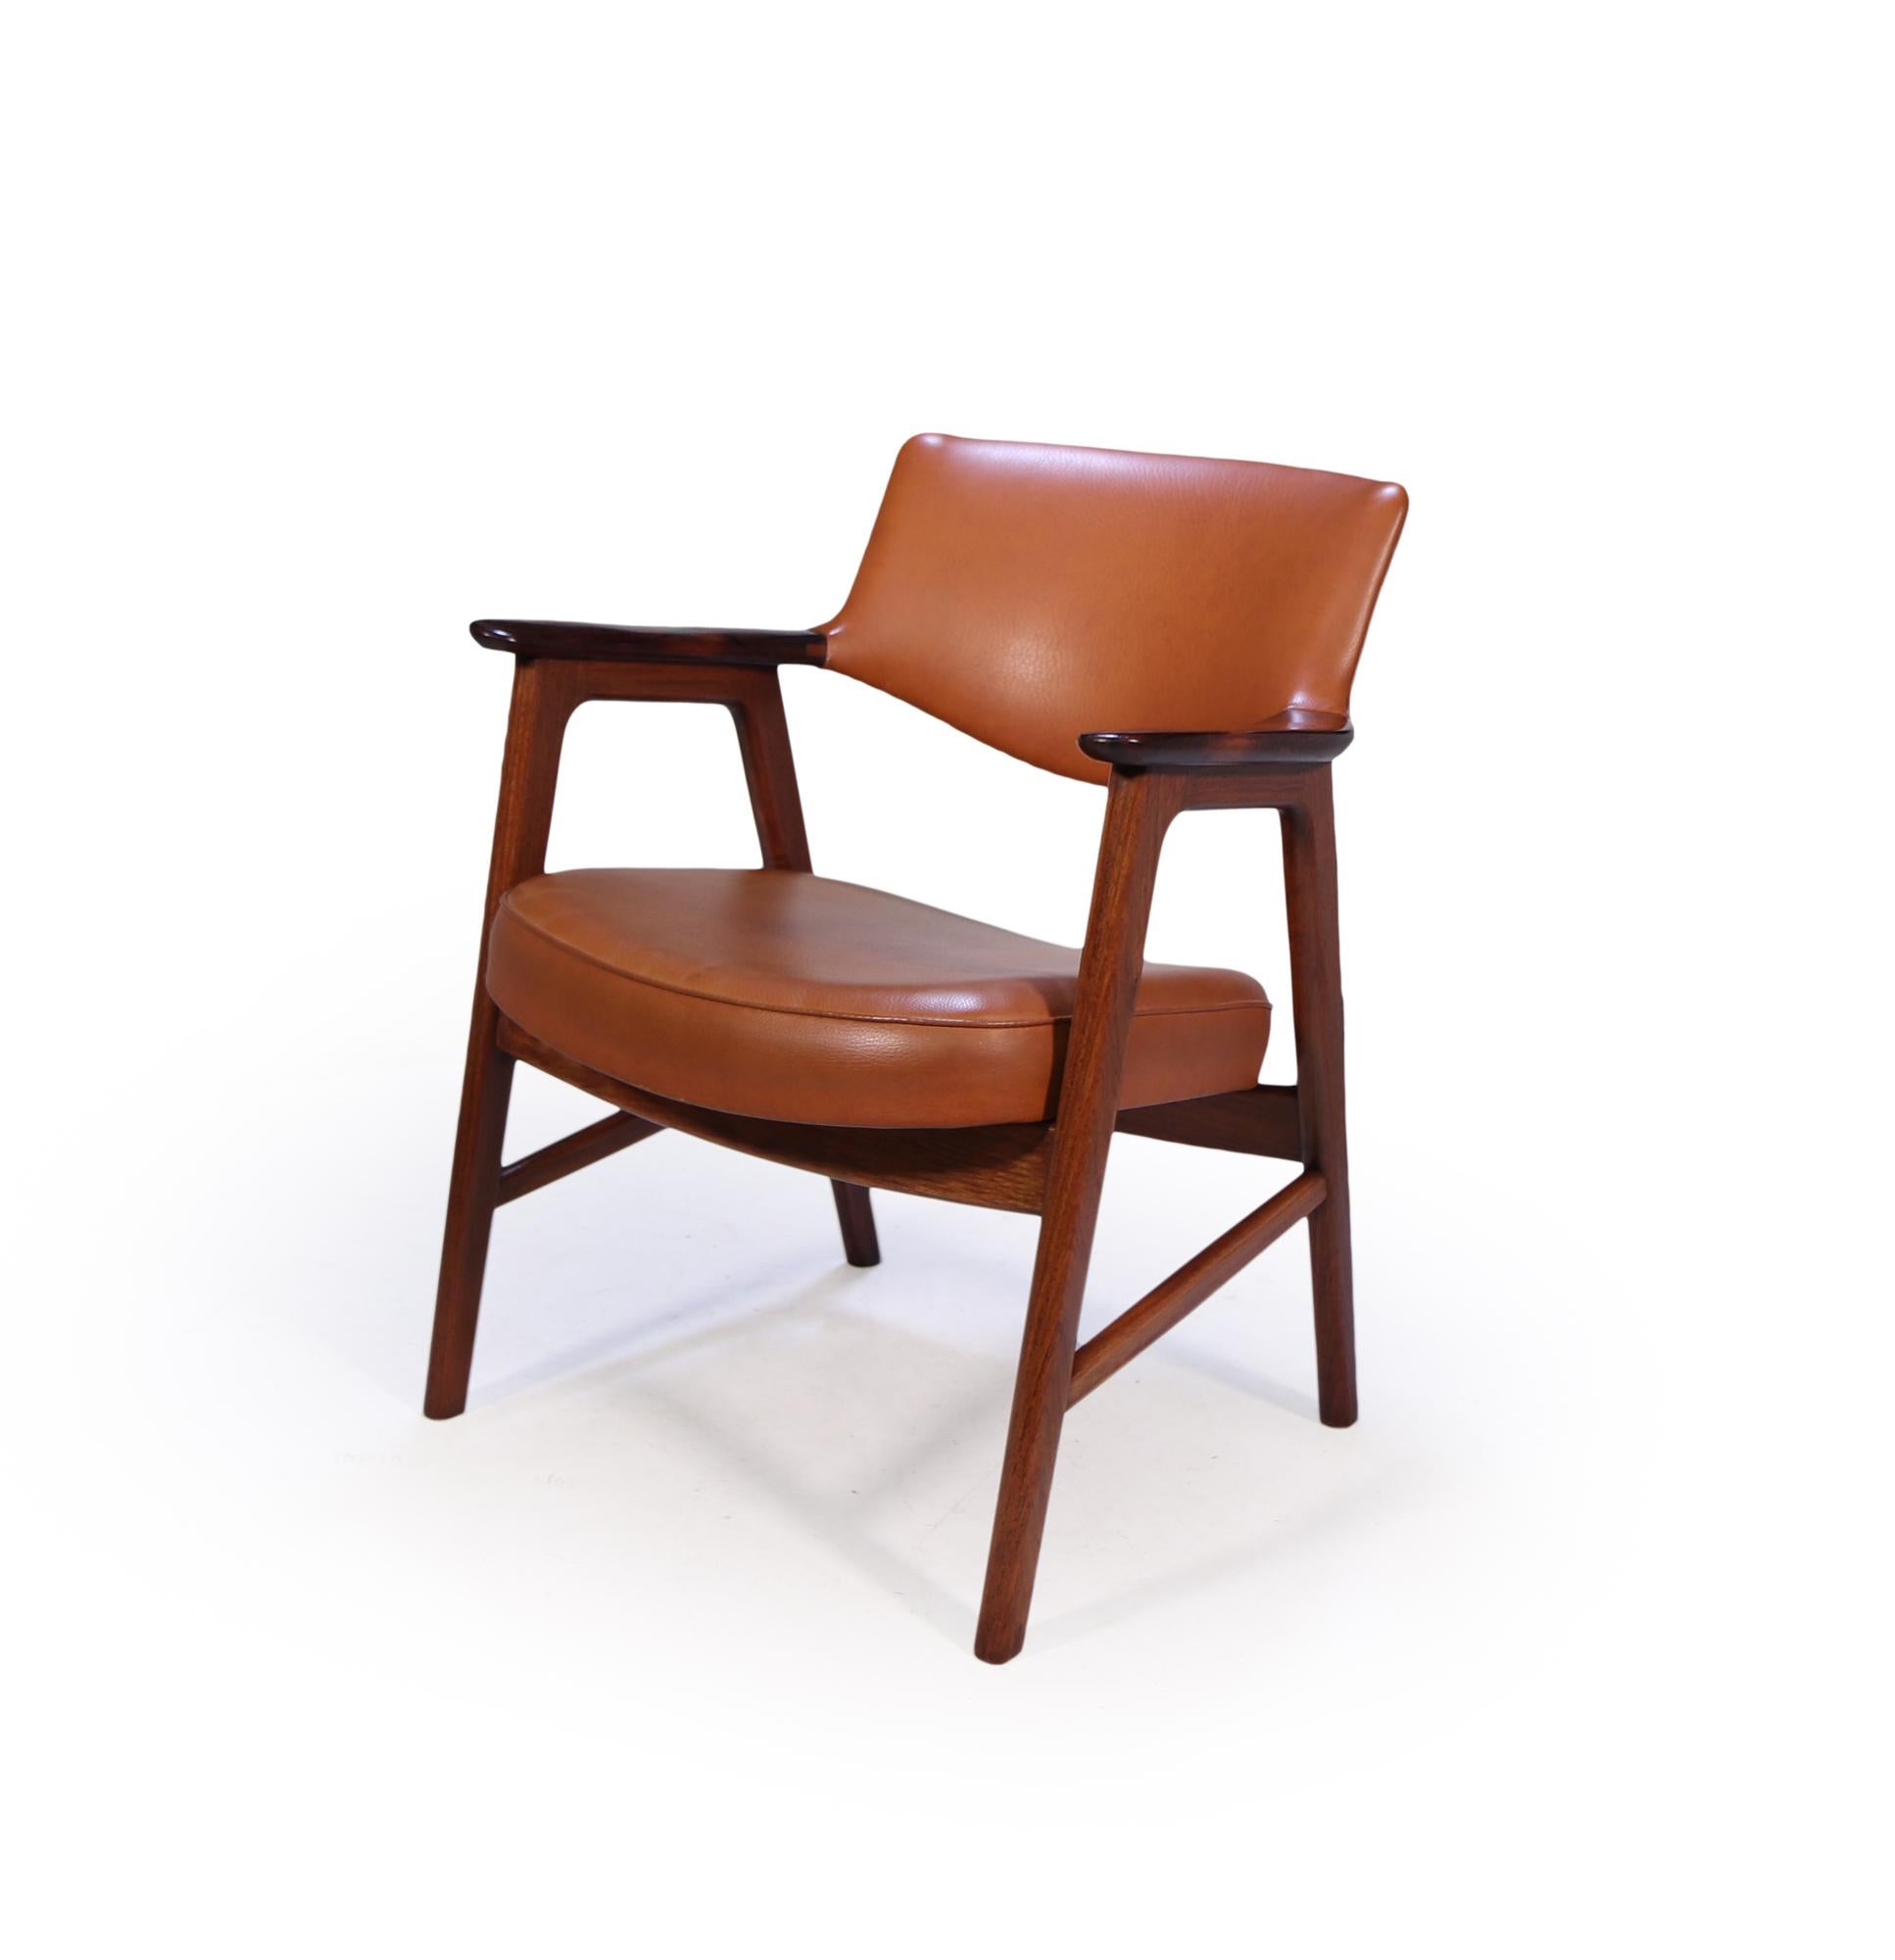 A well designed and crafted chair, produced in rosewood so is very heavy and strong, having no loose joints and very stable, this chair will last for many years, the vinyl upholstery is all intact wit no damage, the chair is in excellent vintage